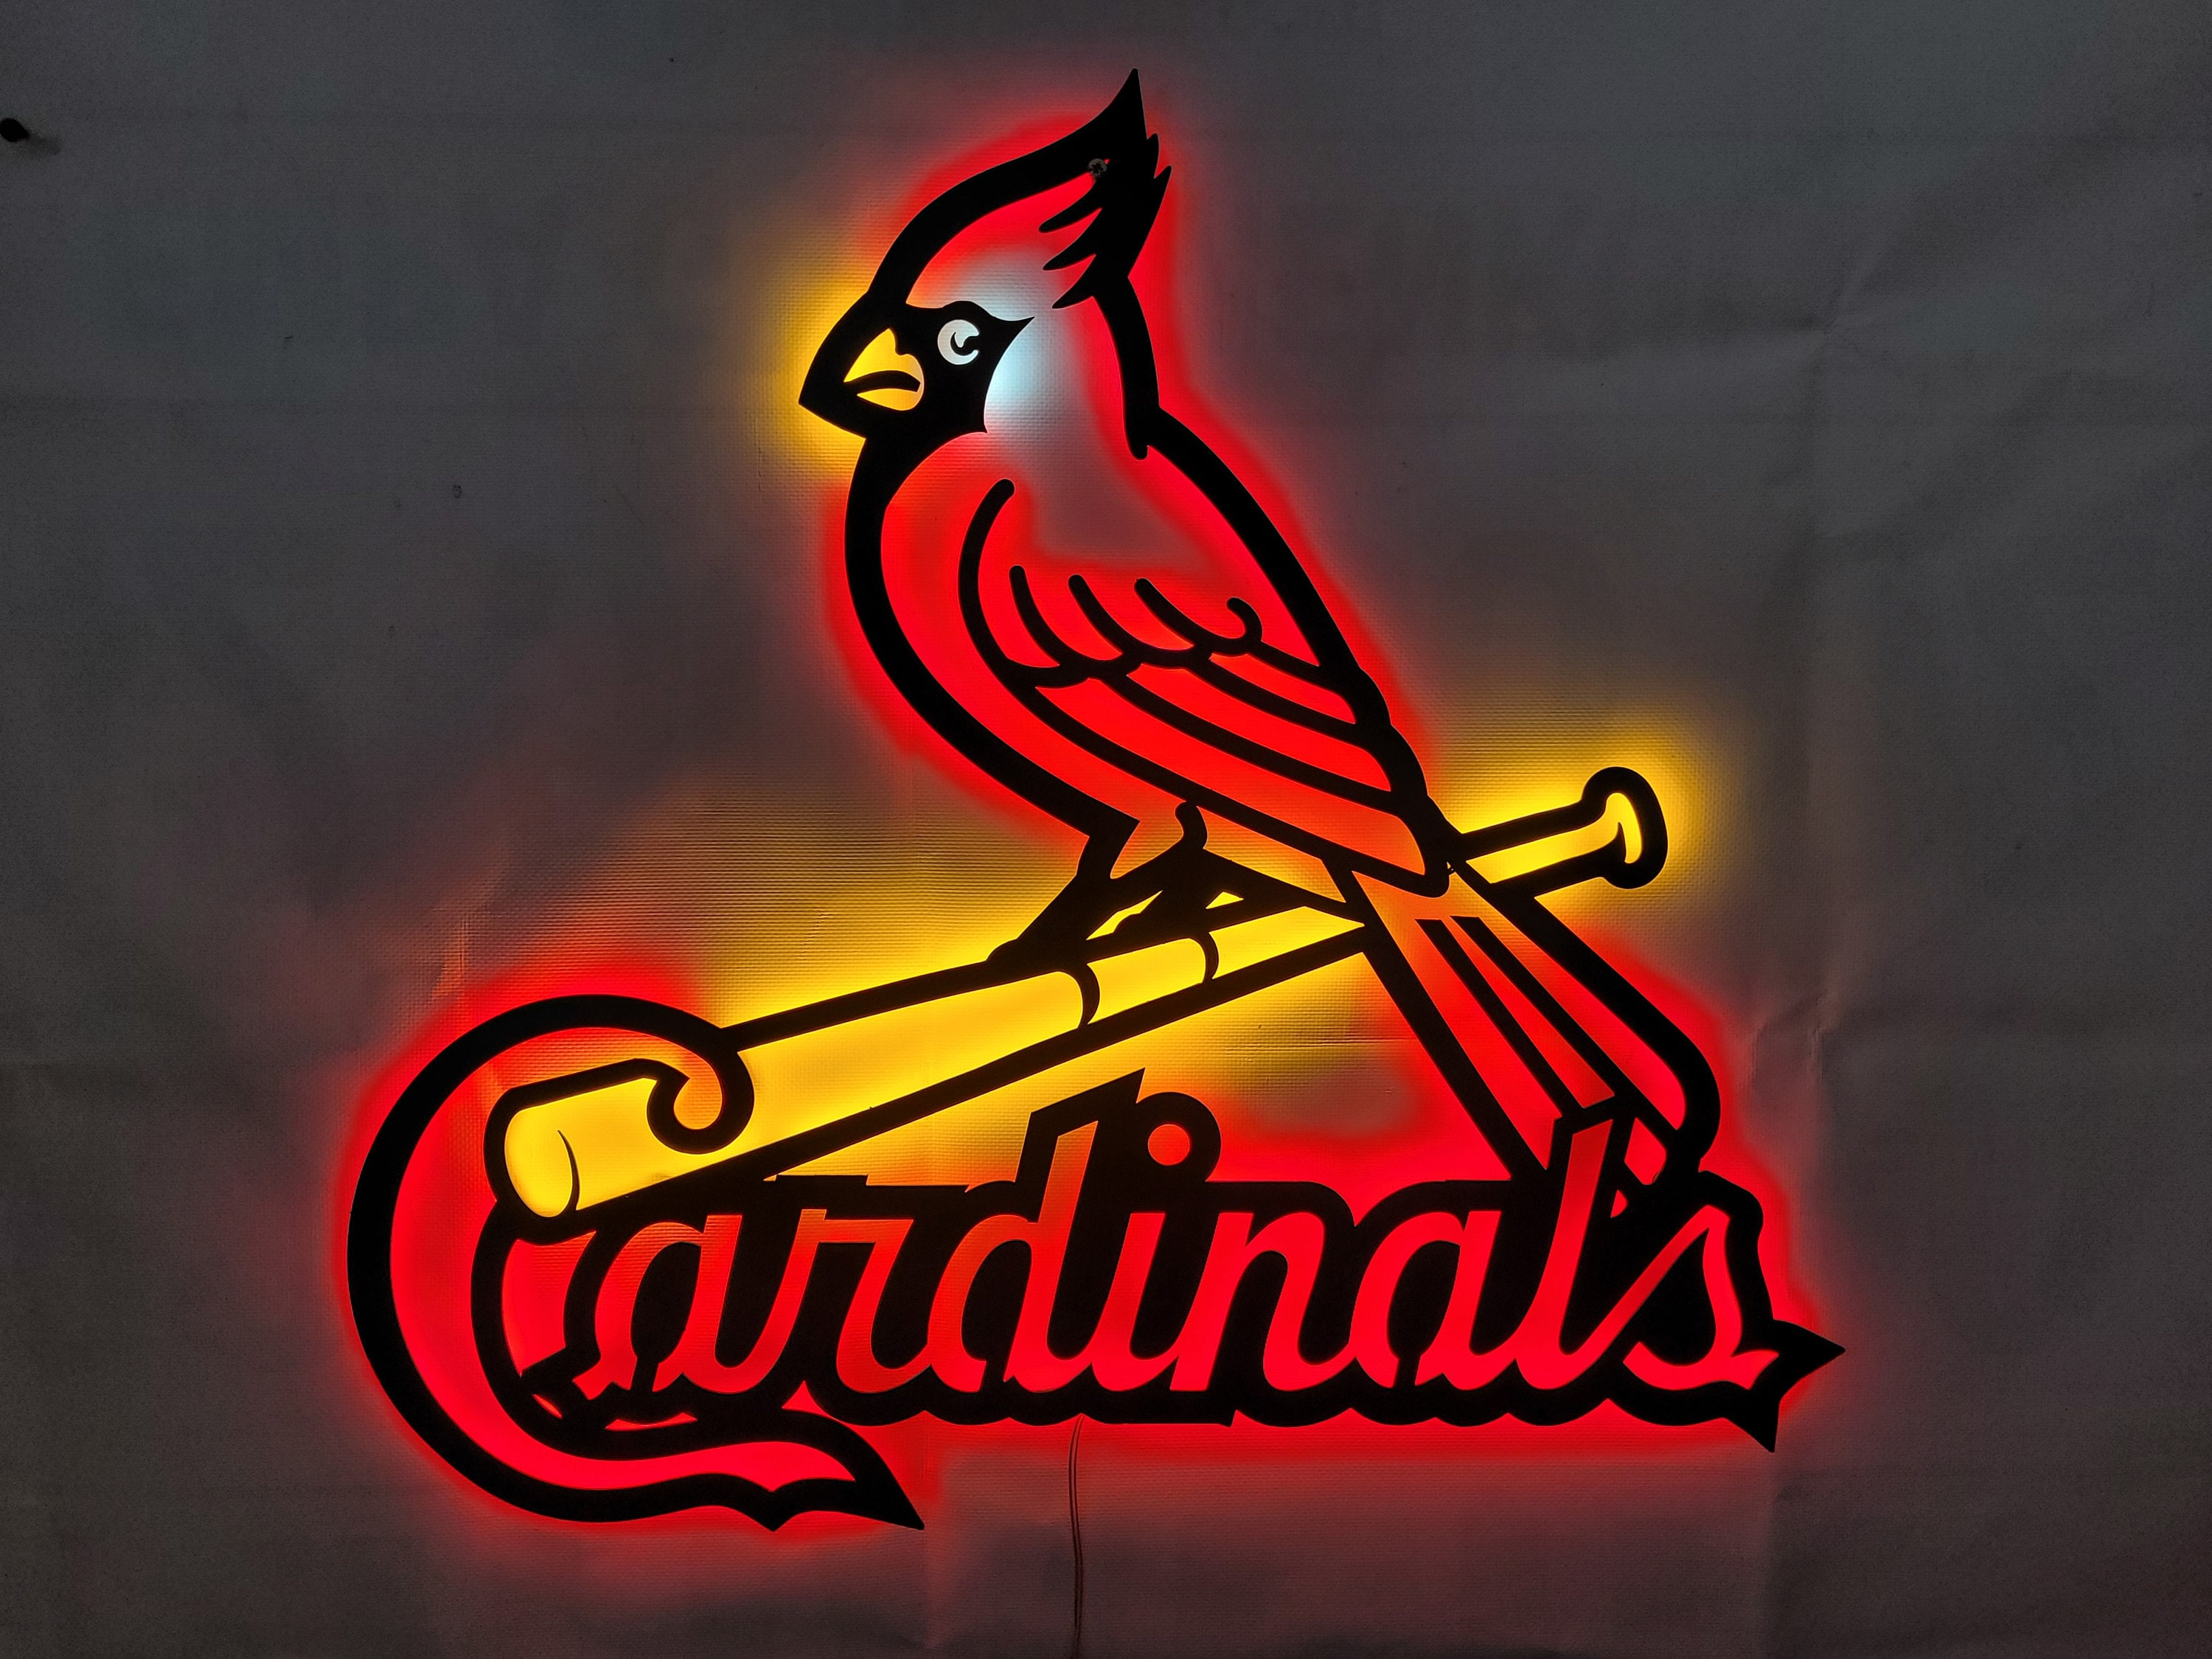 St Louis Cardinals Logo Round Metal Sign Baseball Signs Gift for Fans -  Custom Laser Cut Metal Art & Signs, Gift & Home Decor